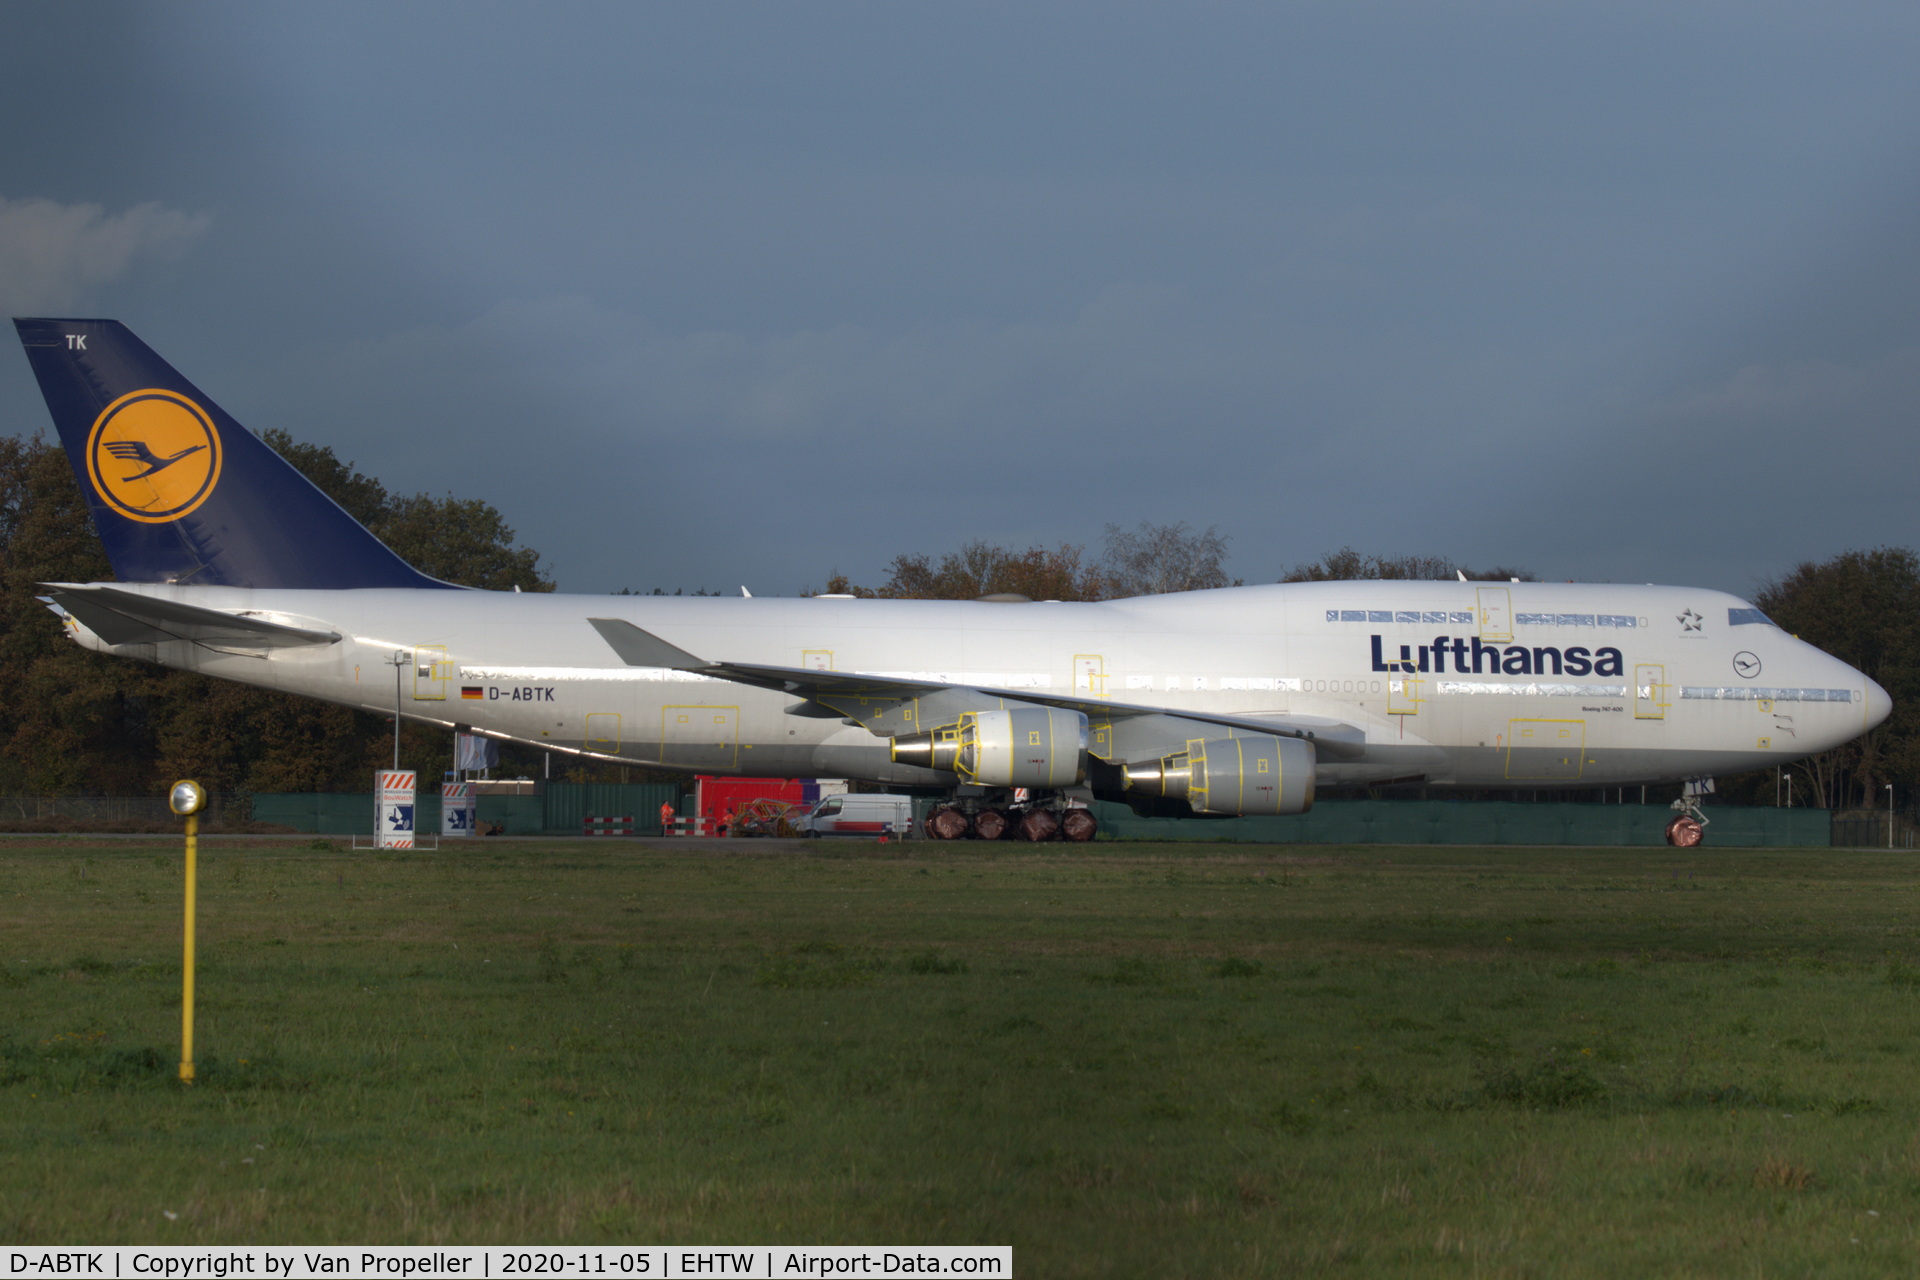 D-ABTK, 2001 Boeing 747-430 C/N 29871, Lufthansa Boeing 747-430 stored at Twente airport, the Netherlands, due to the Covid-19 pandemic.